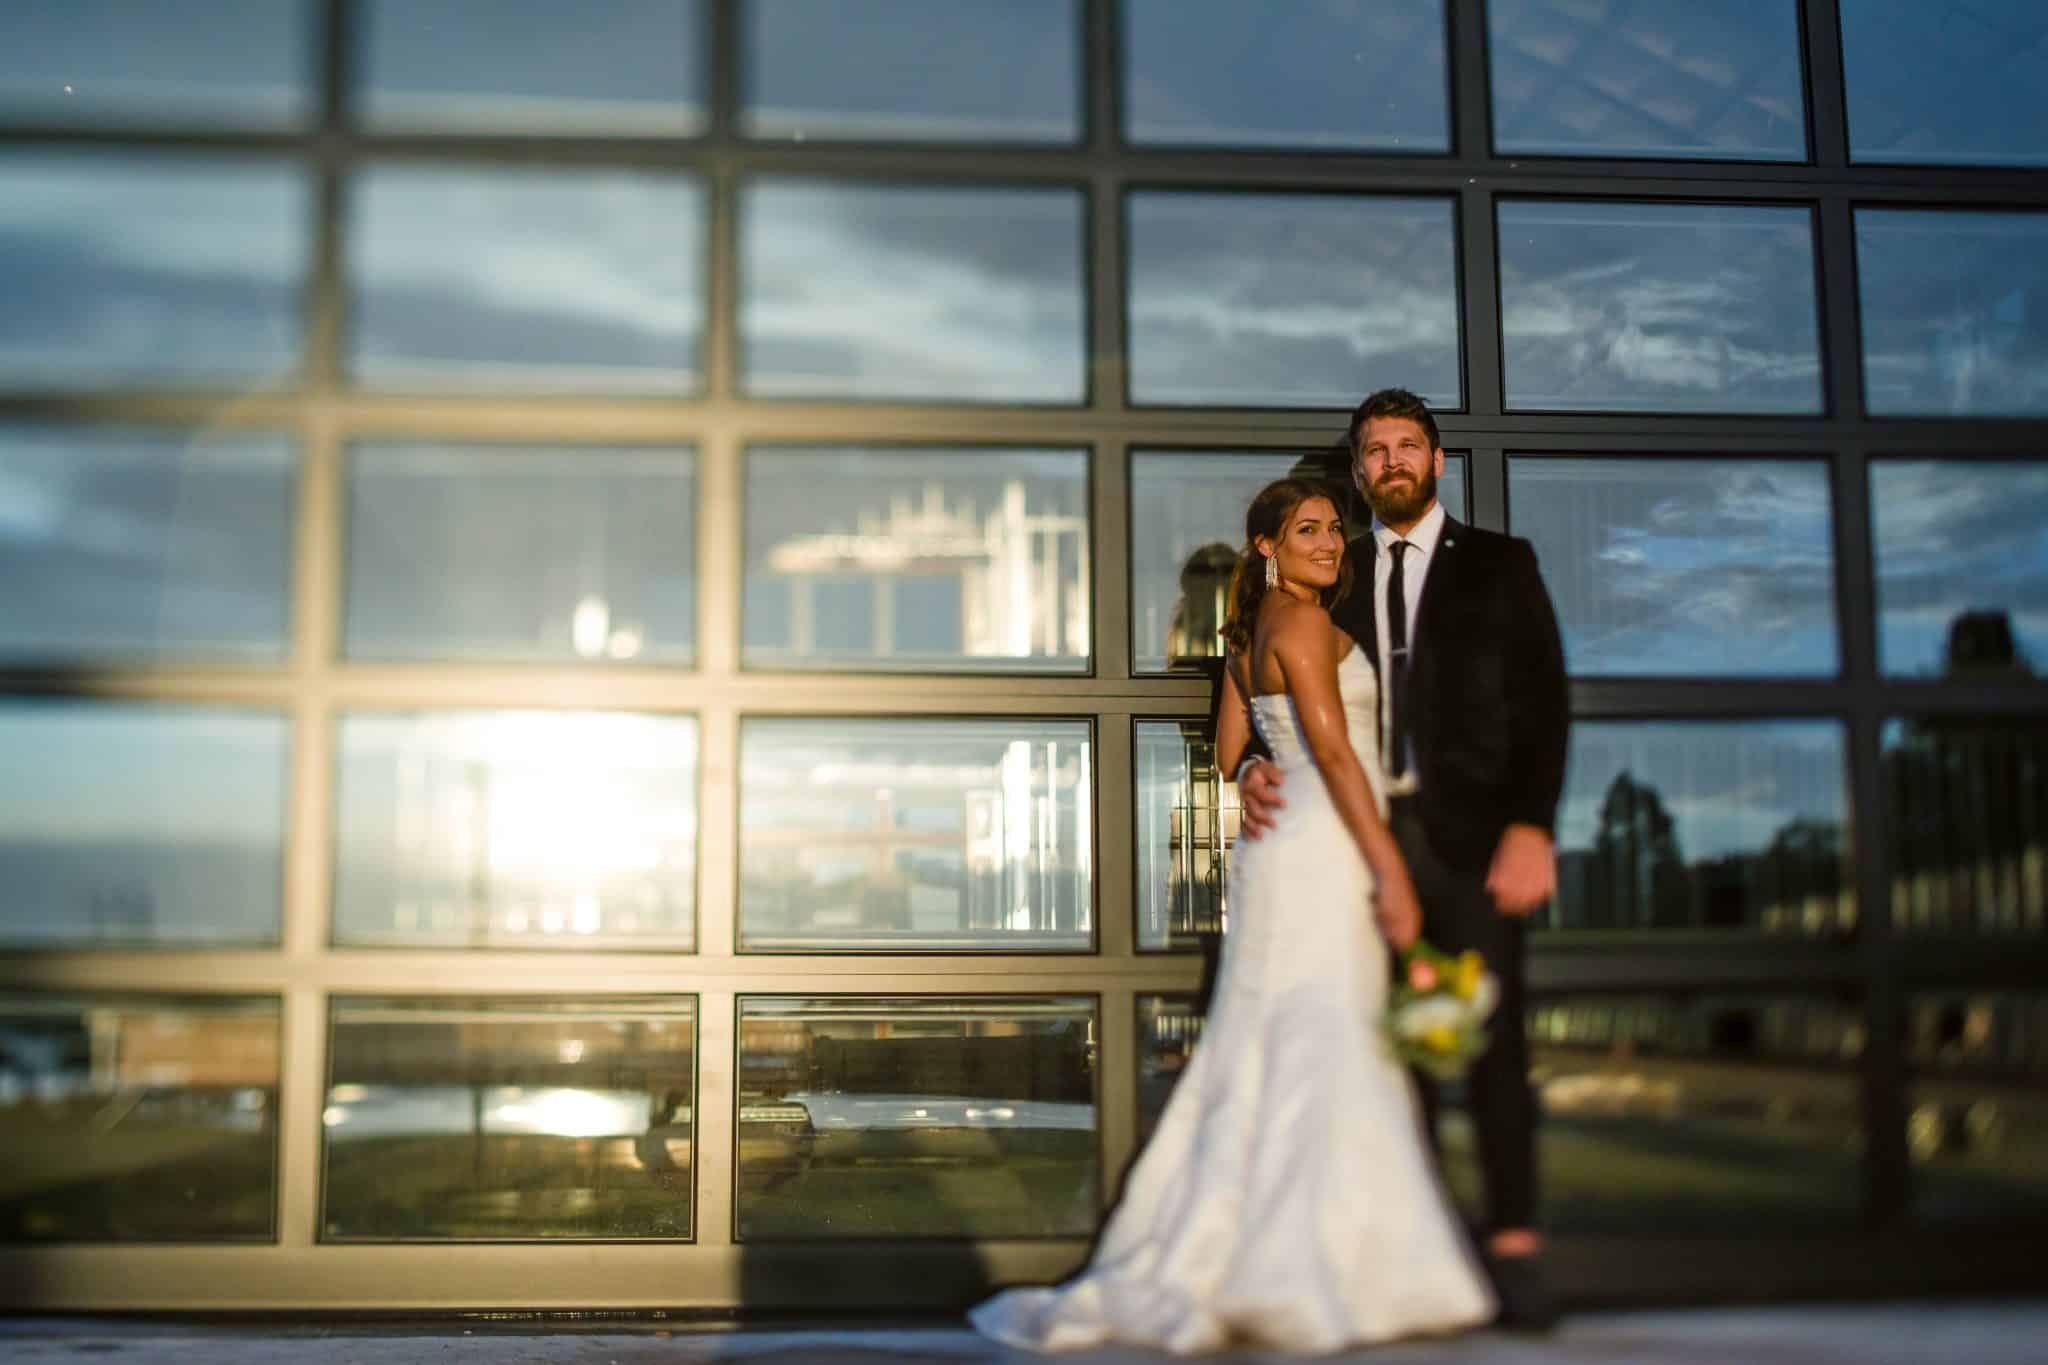 Bride and groom posing in from of a glass wall of a building, near sunset with a reflection on the glass, Lavender on the Lake, Orlando, FL